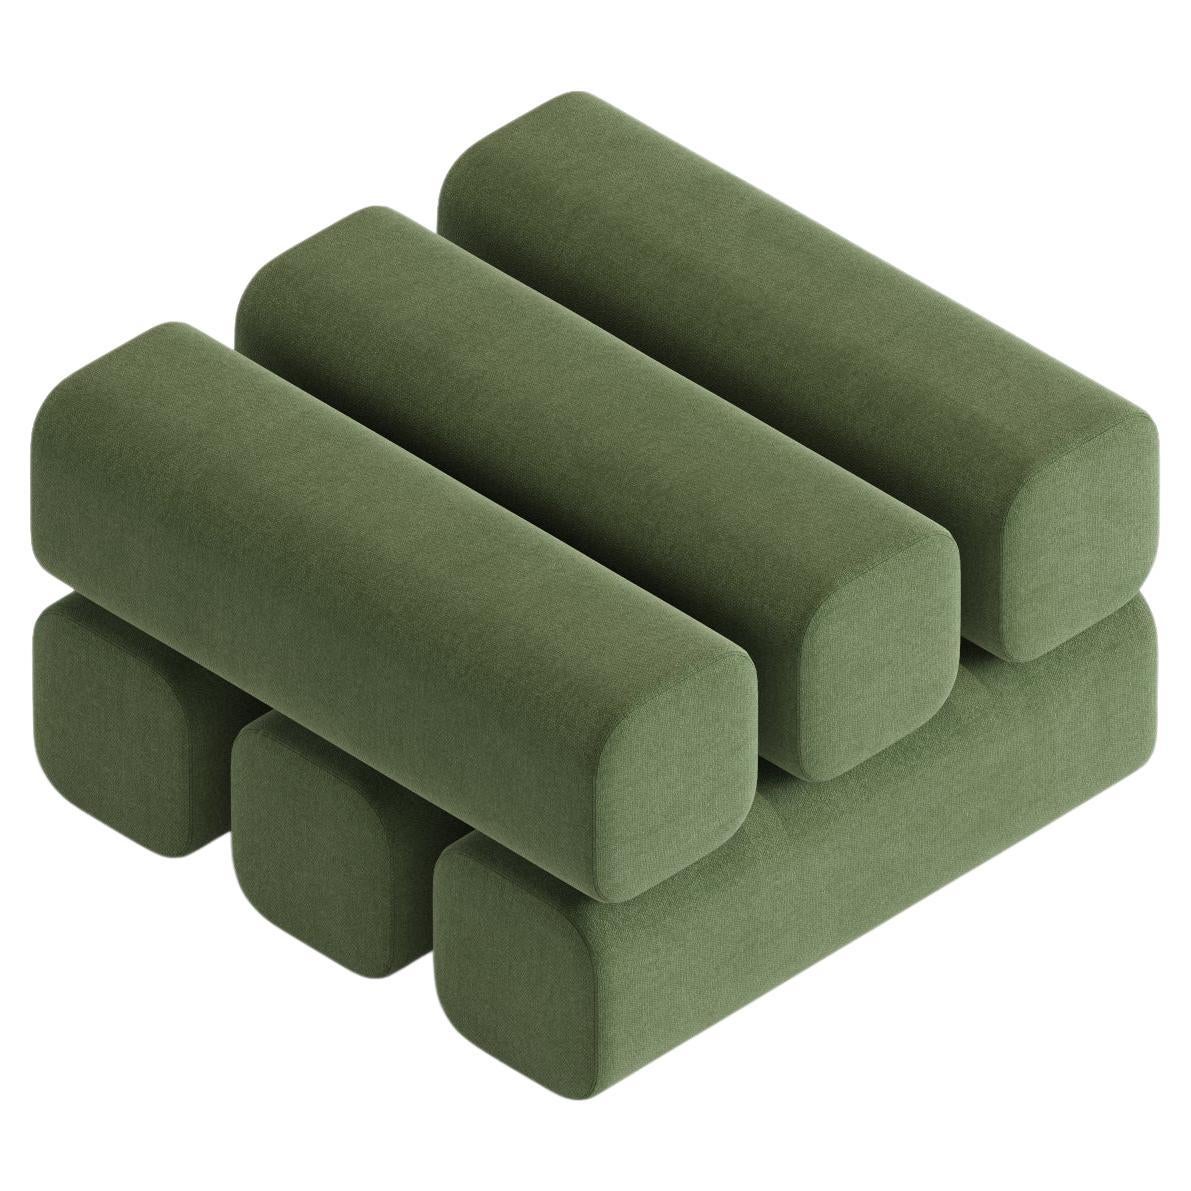 Ottoman pouf Drova 6 in Green color by Woo For Sale